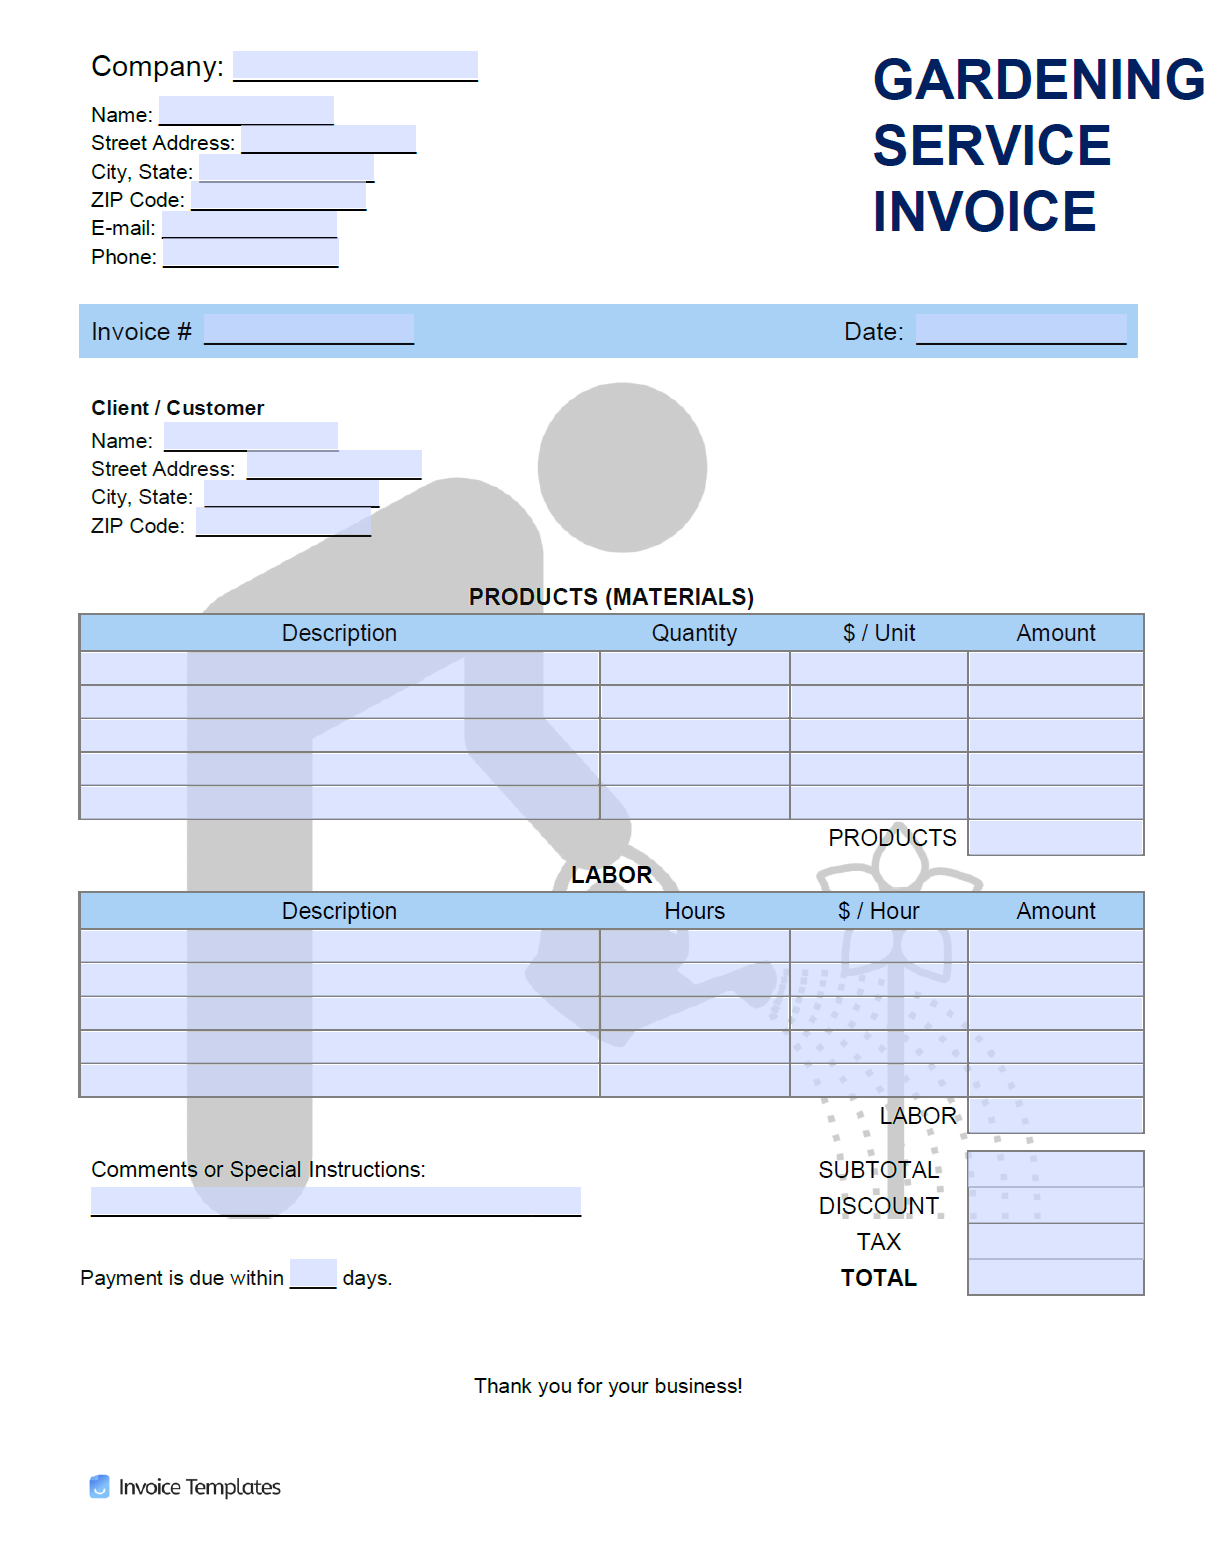 Free Gardening Service Invoice Template Pdf Word Excel